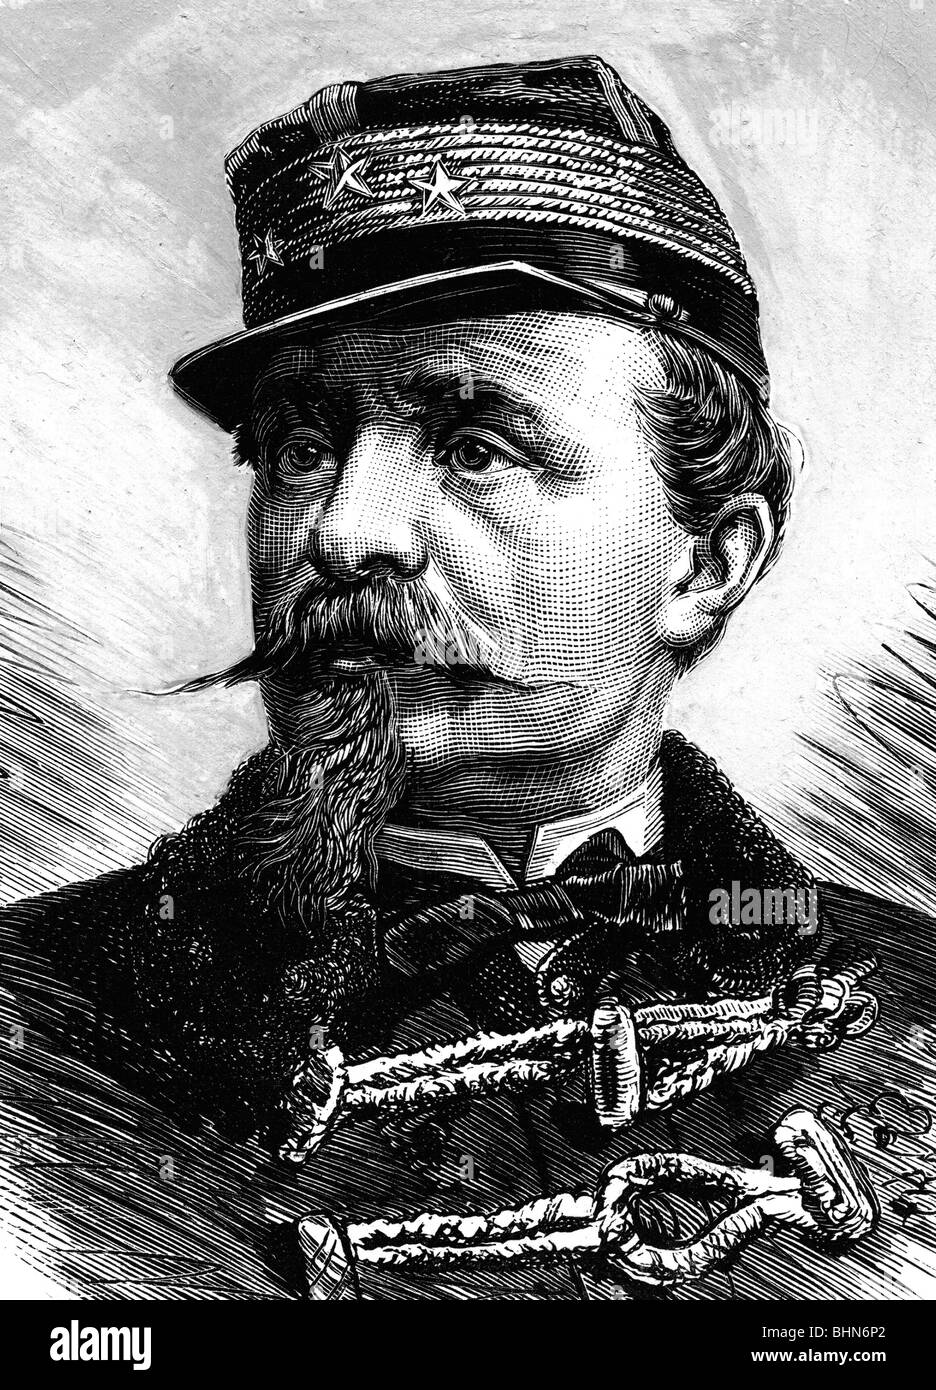 Chanzy, Antoine, 18.3.1823 - 4.1.1883, French general, portrait, wood engraving, 19th century, , Stock Photo